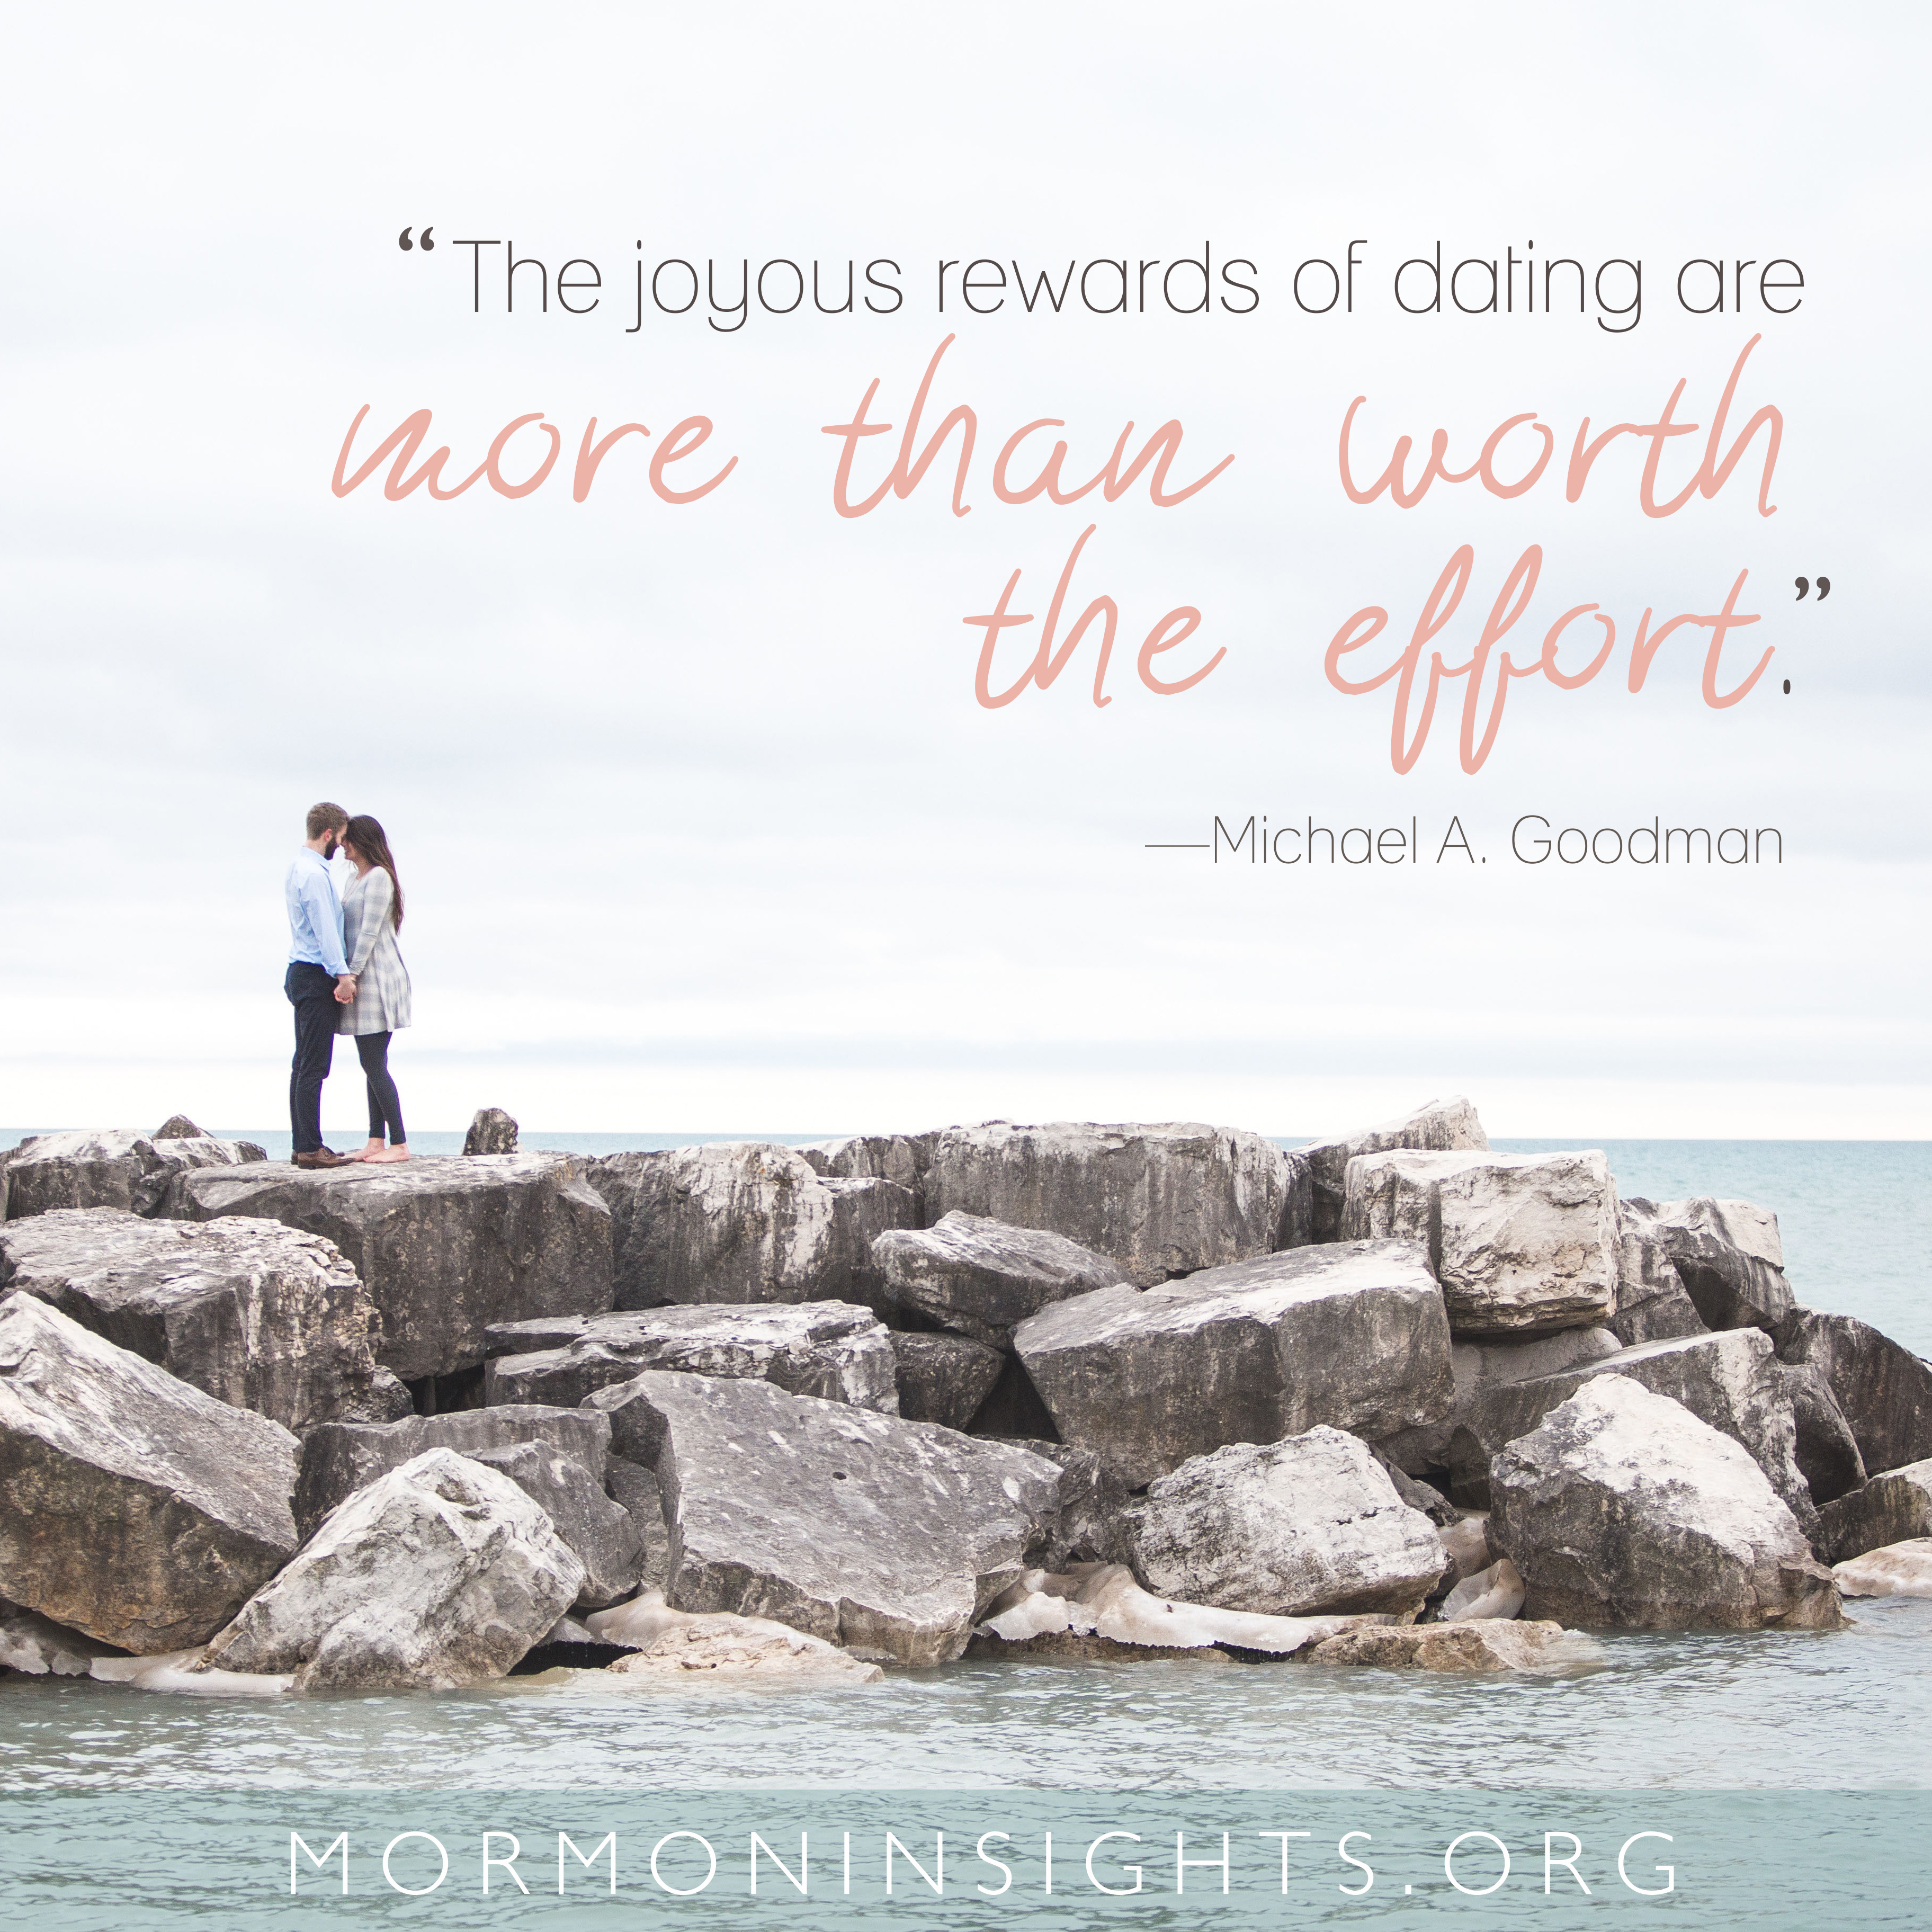 "The joyous rewards of dating are more than worth the effort." -Michael A. Goodman